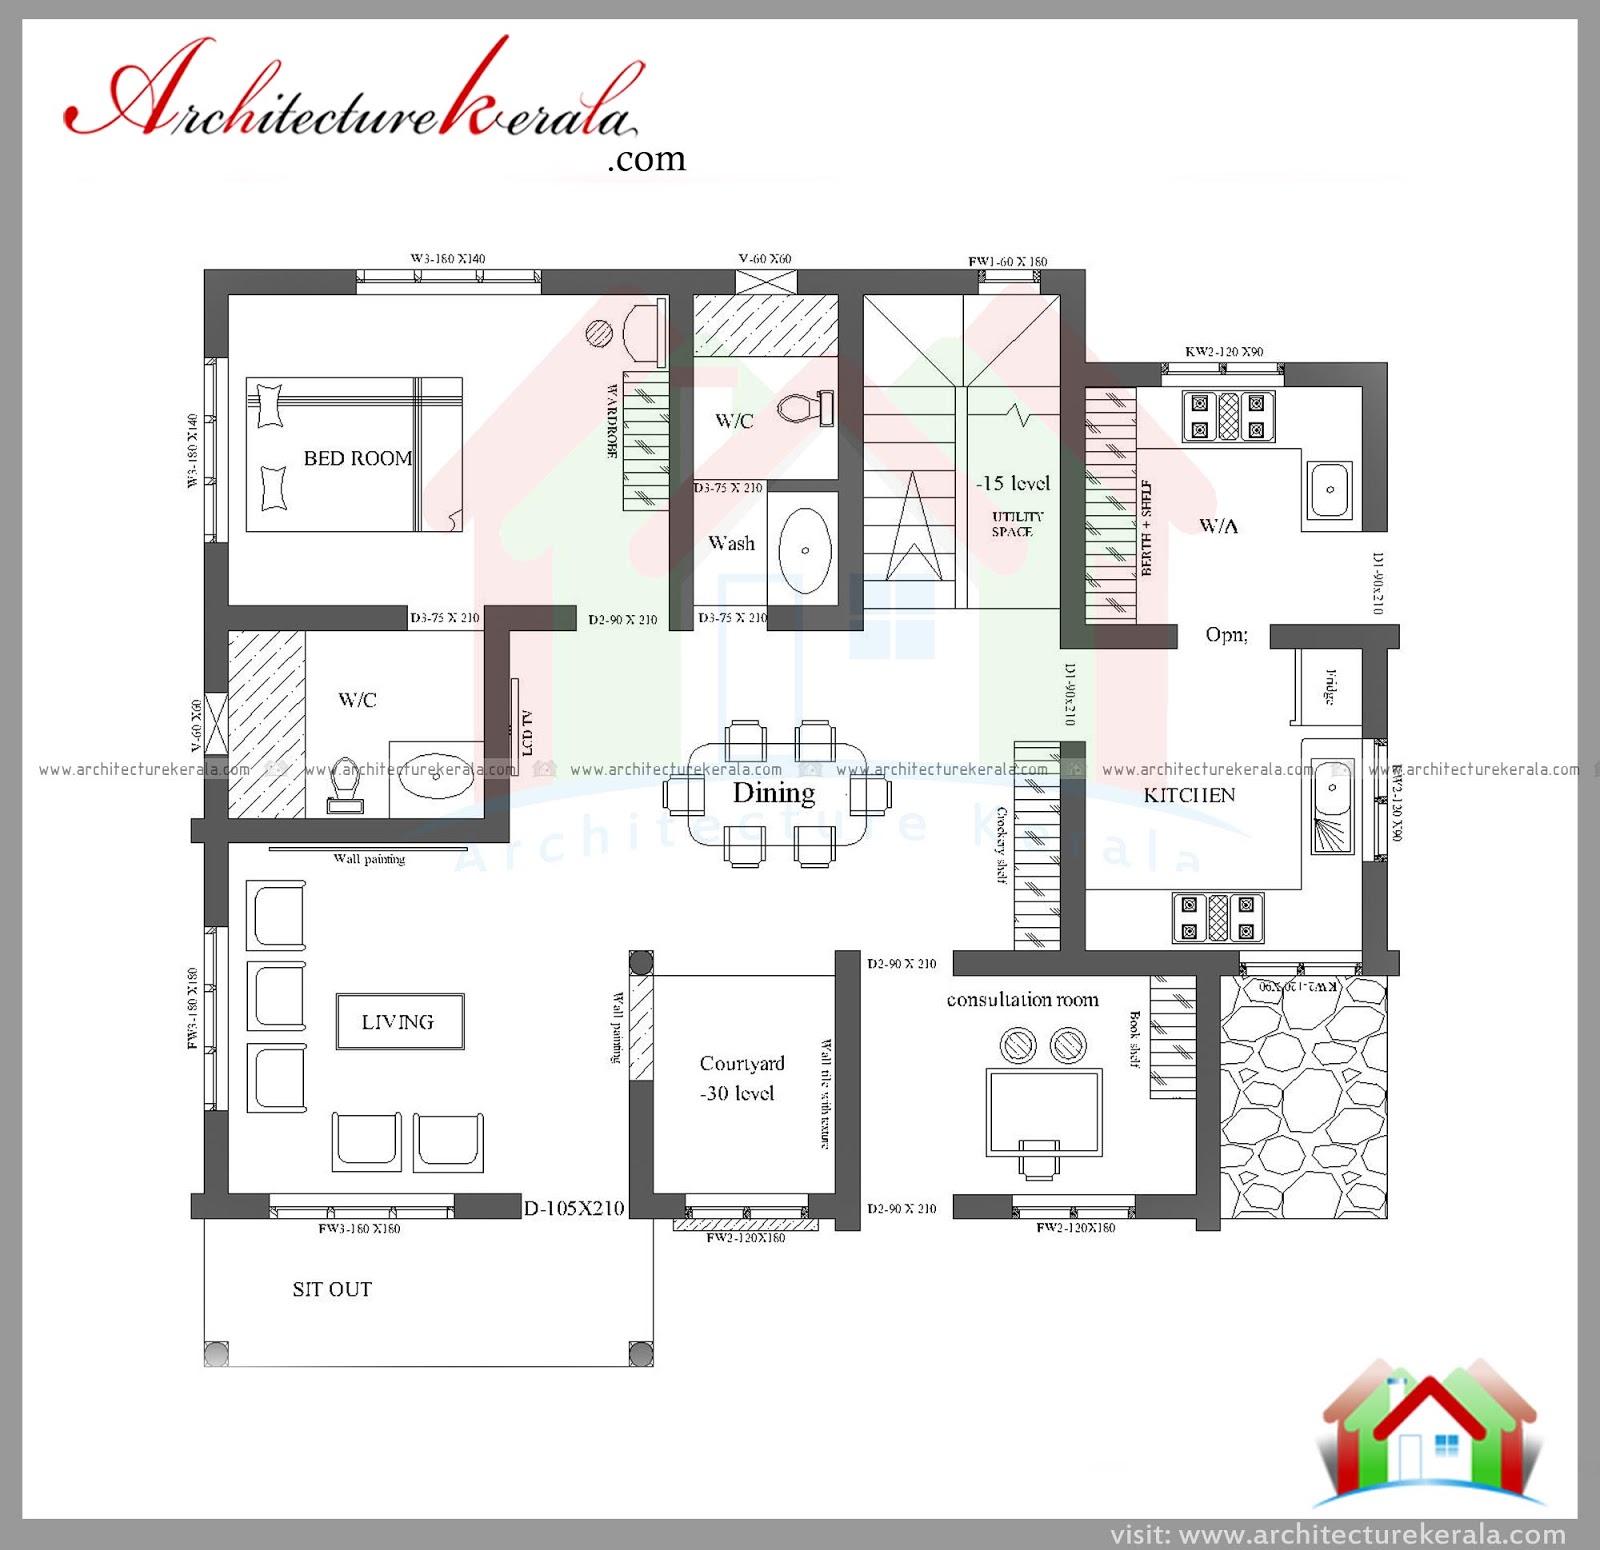 2 Floor Kerala Home Design With Consultation Room Office Room Free Kerala Home Plans